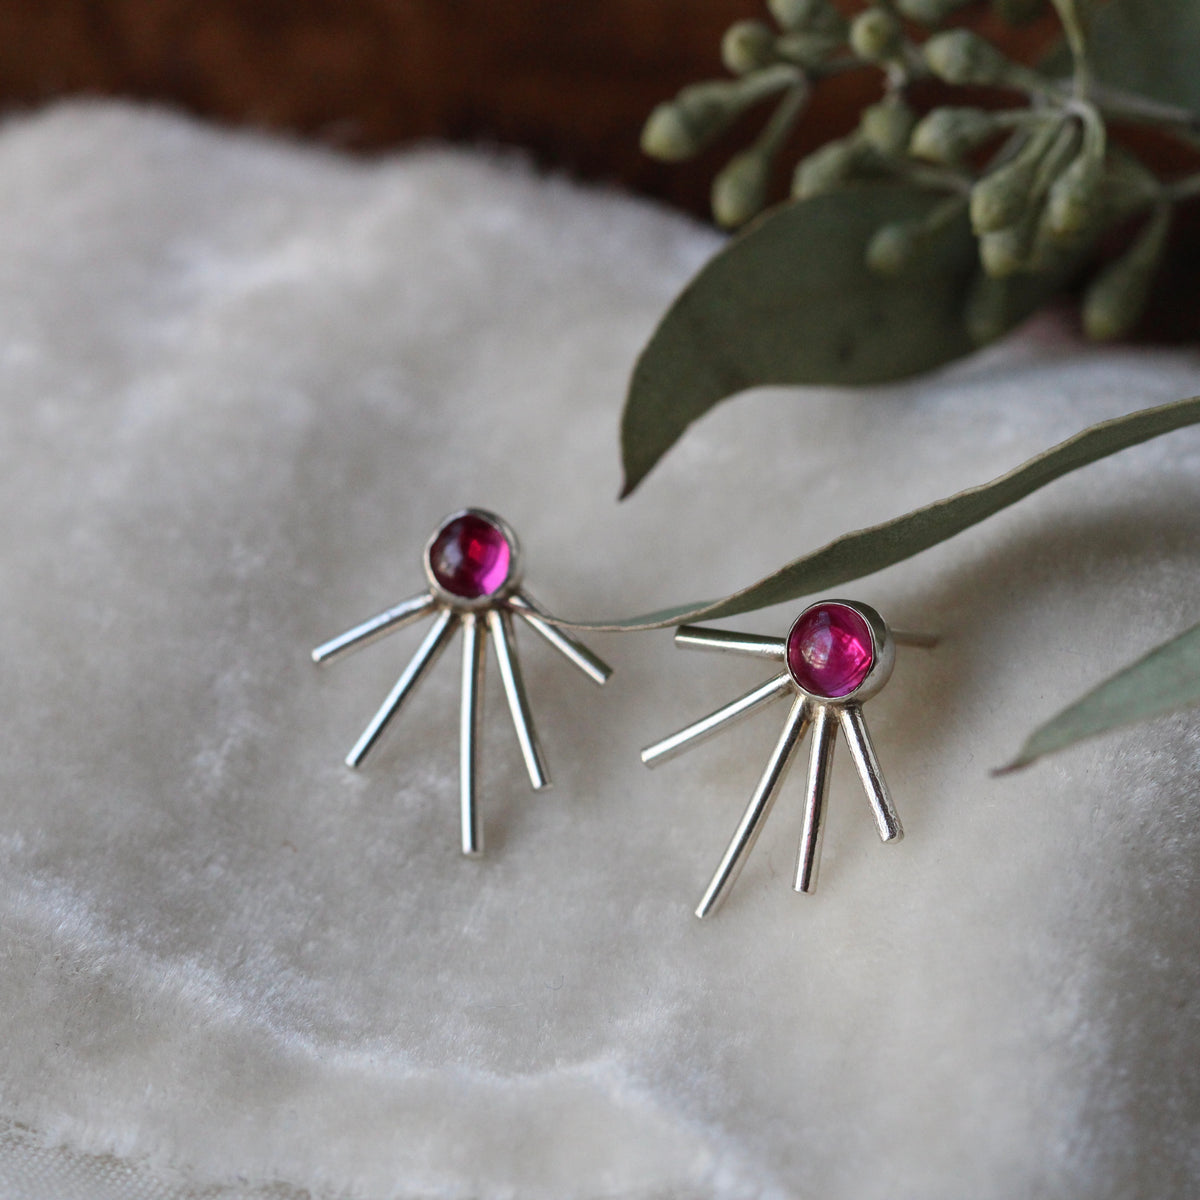 Clearance Sale Starburst earrings Ruby and sterling silver